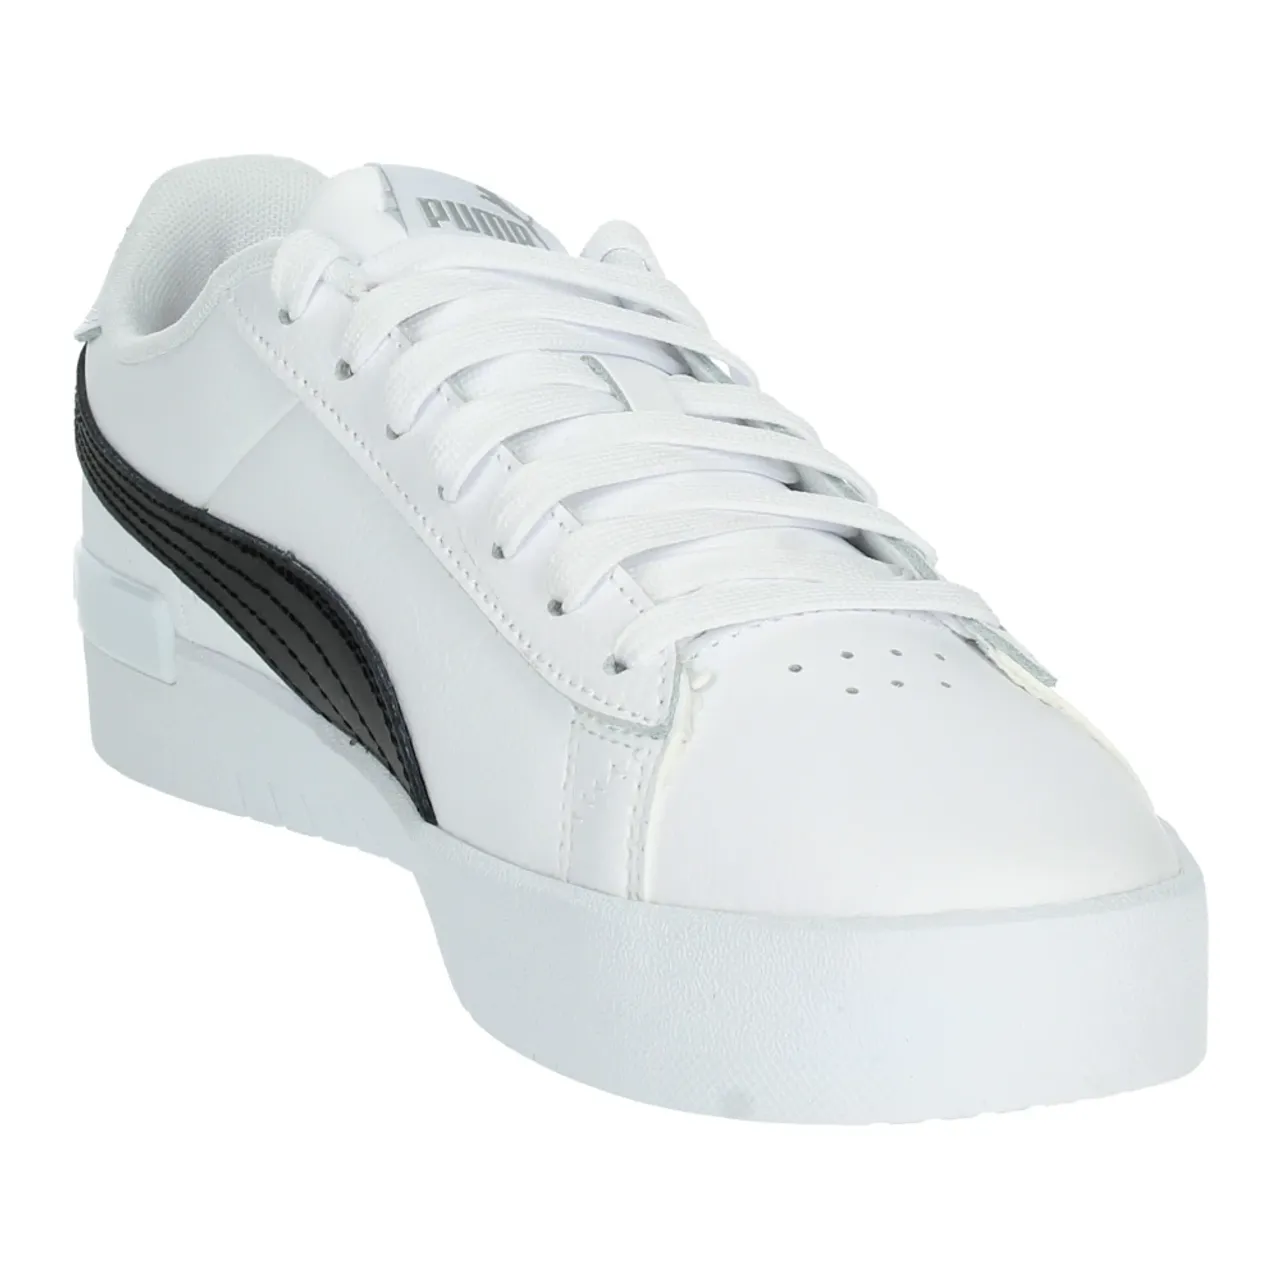 Puma , Low Top Sneakers ,White female, Sizes: